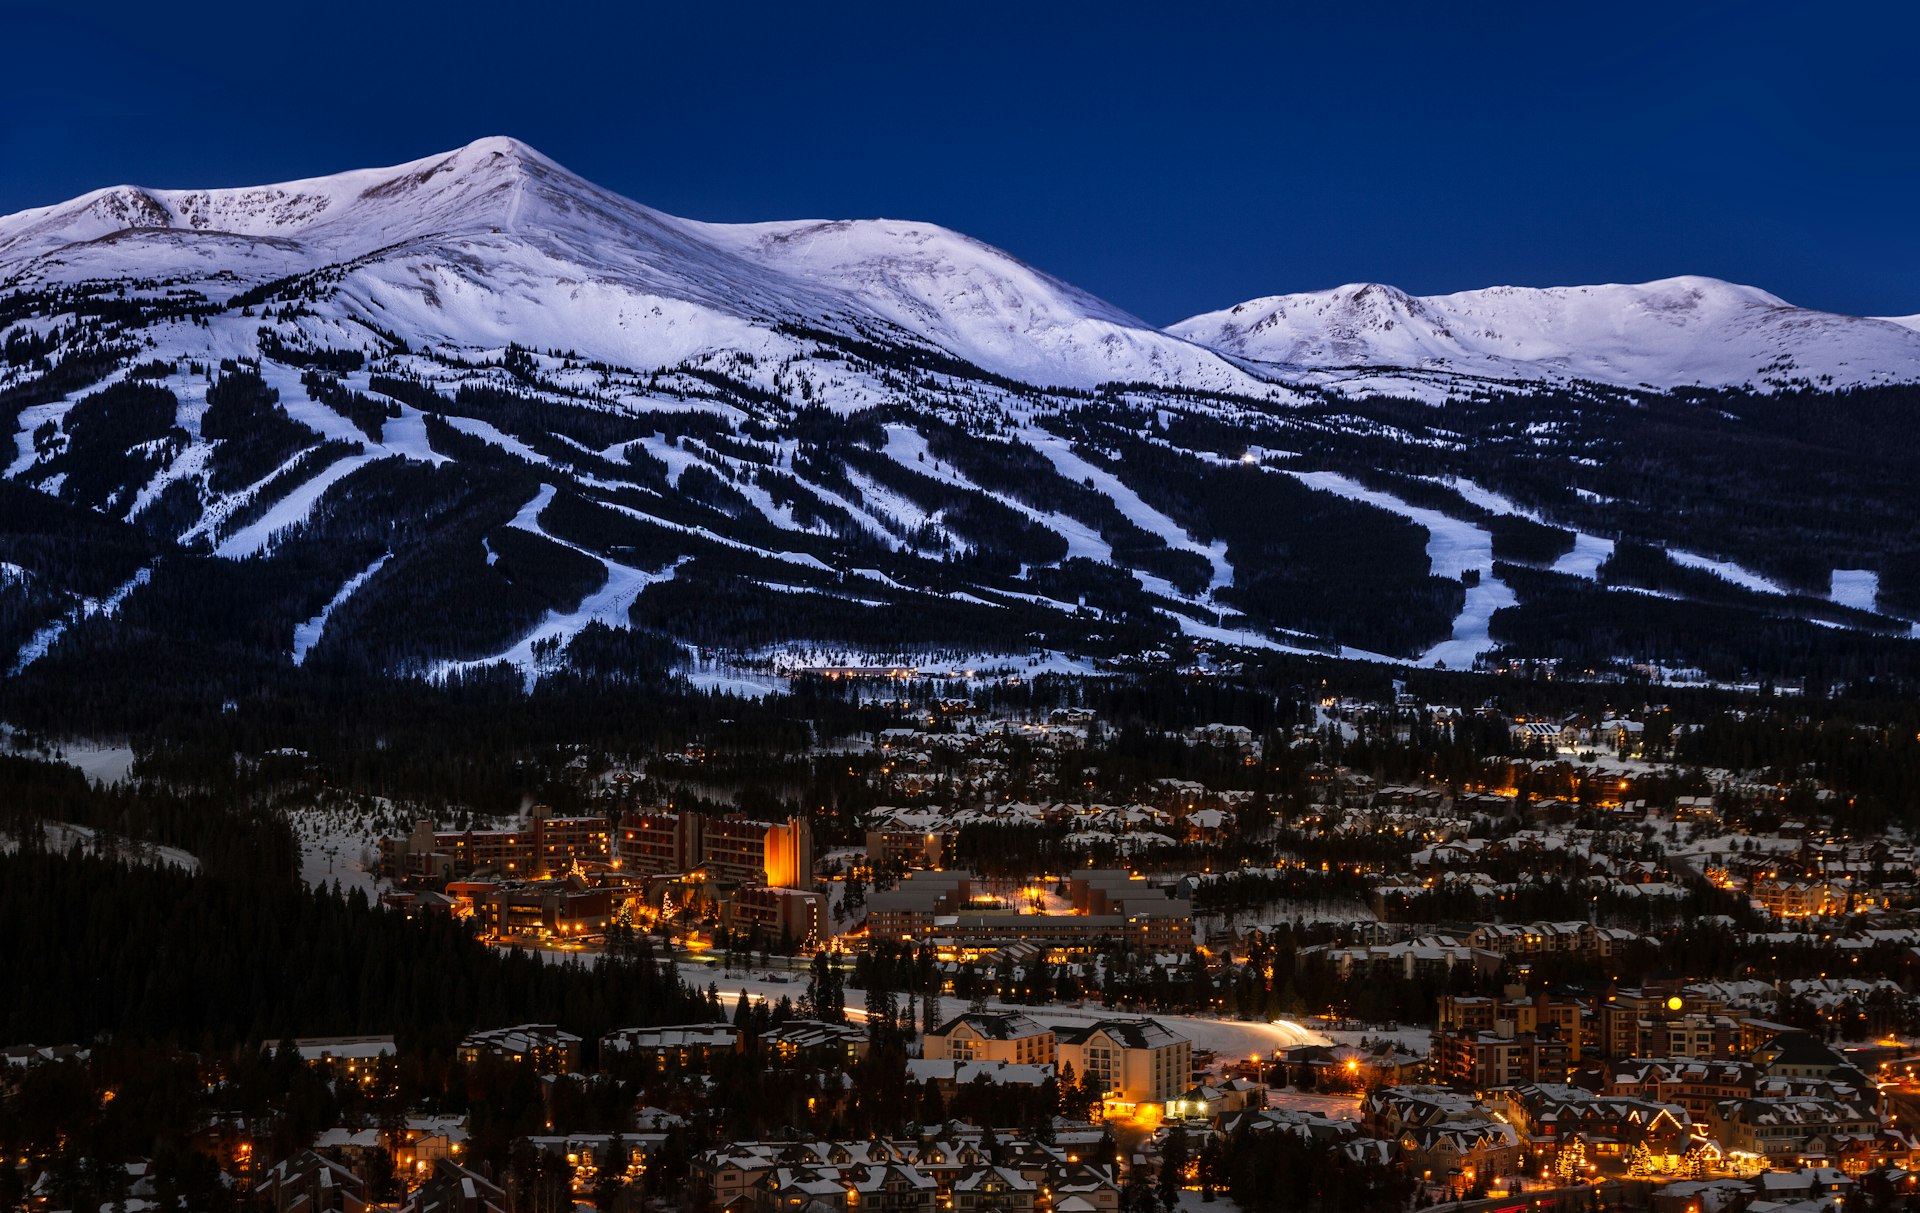 An aerial view of the slopes over the town of Breckenridge at night